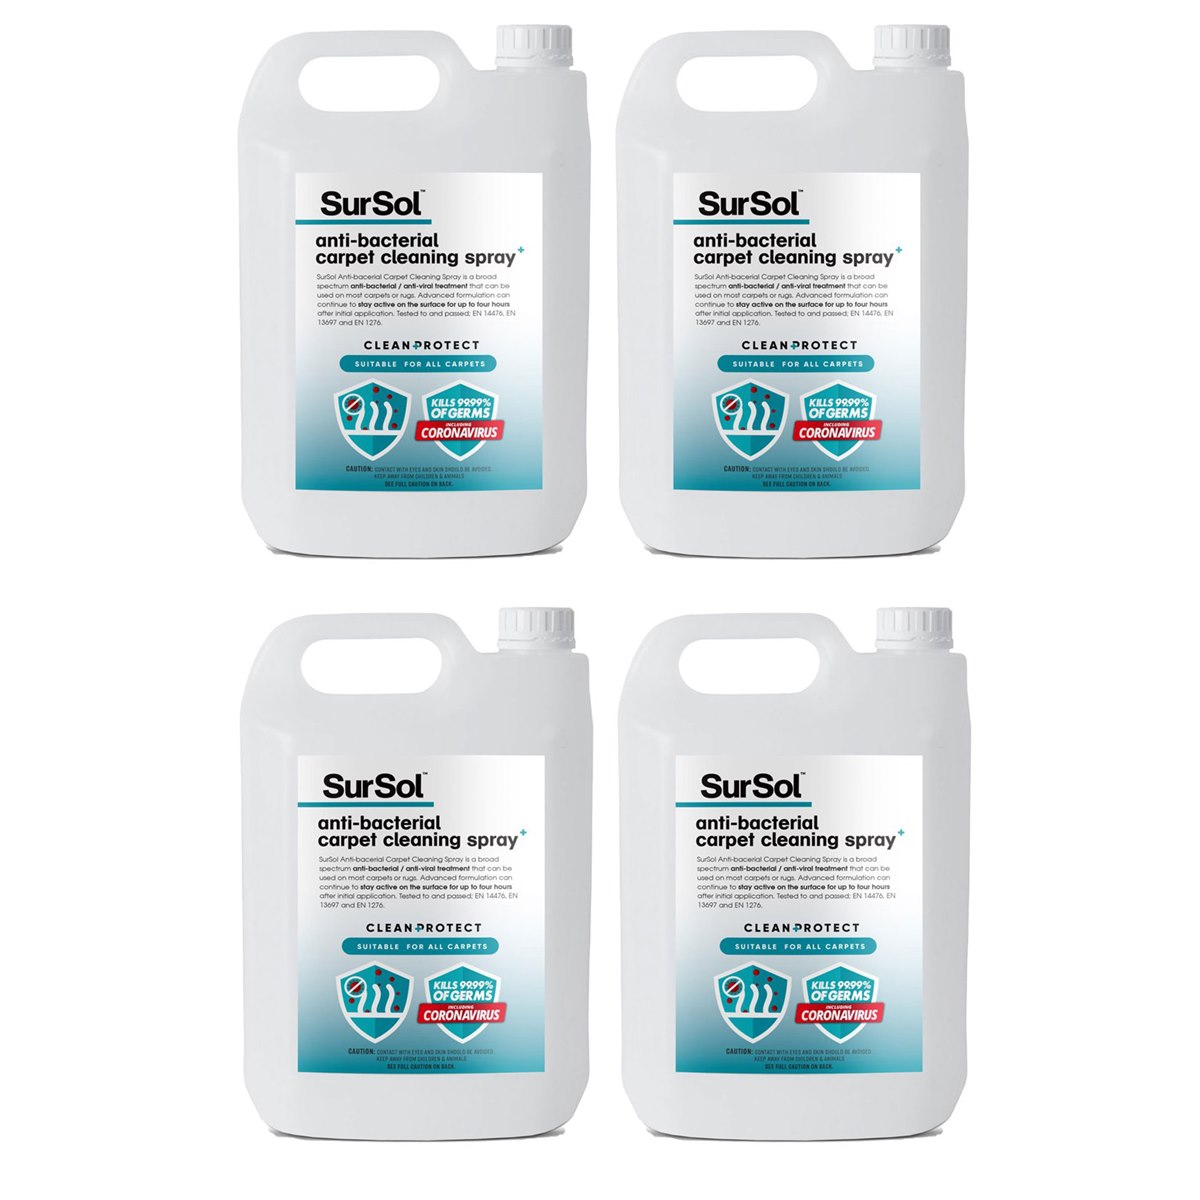 Case of 4 x SurSol Anti-Bacterial Carpet Cleaning Spray Refill 5 Litre